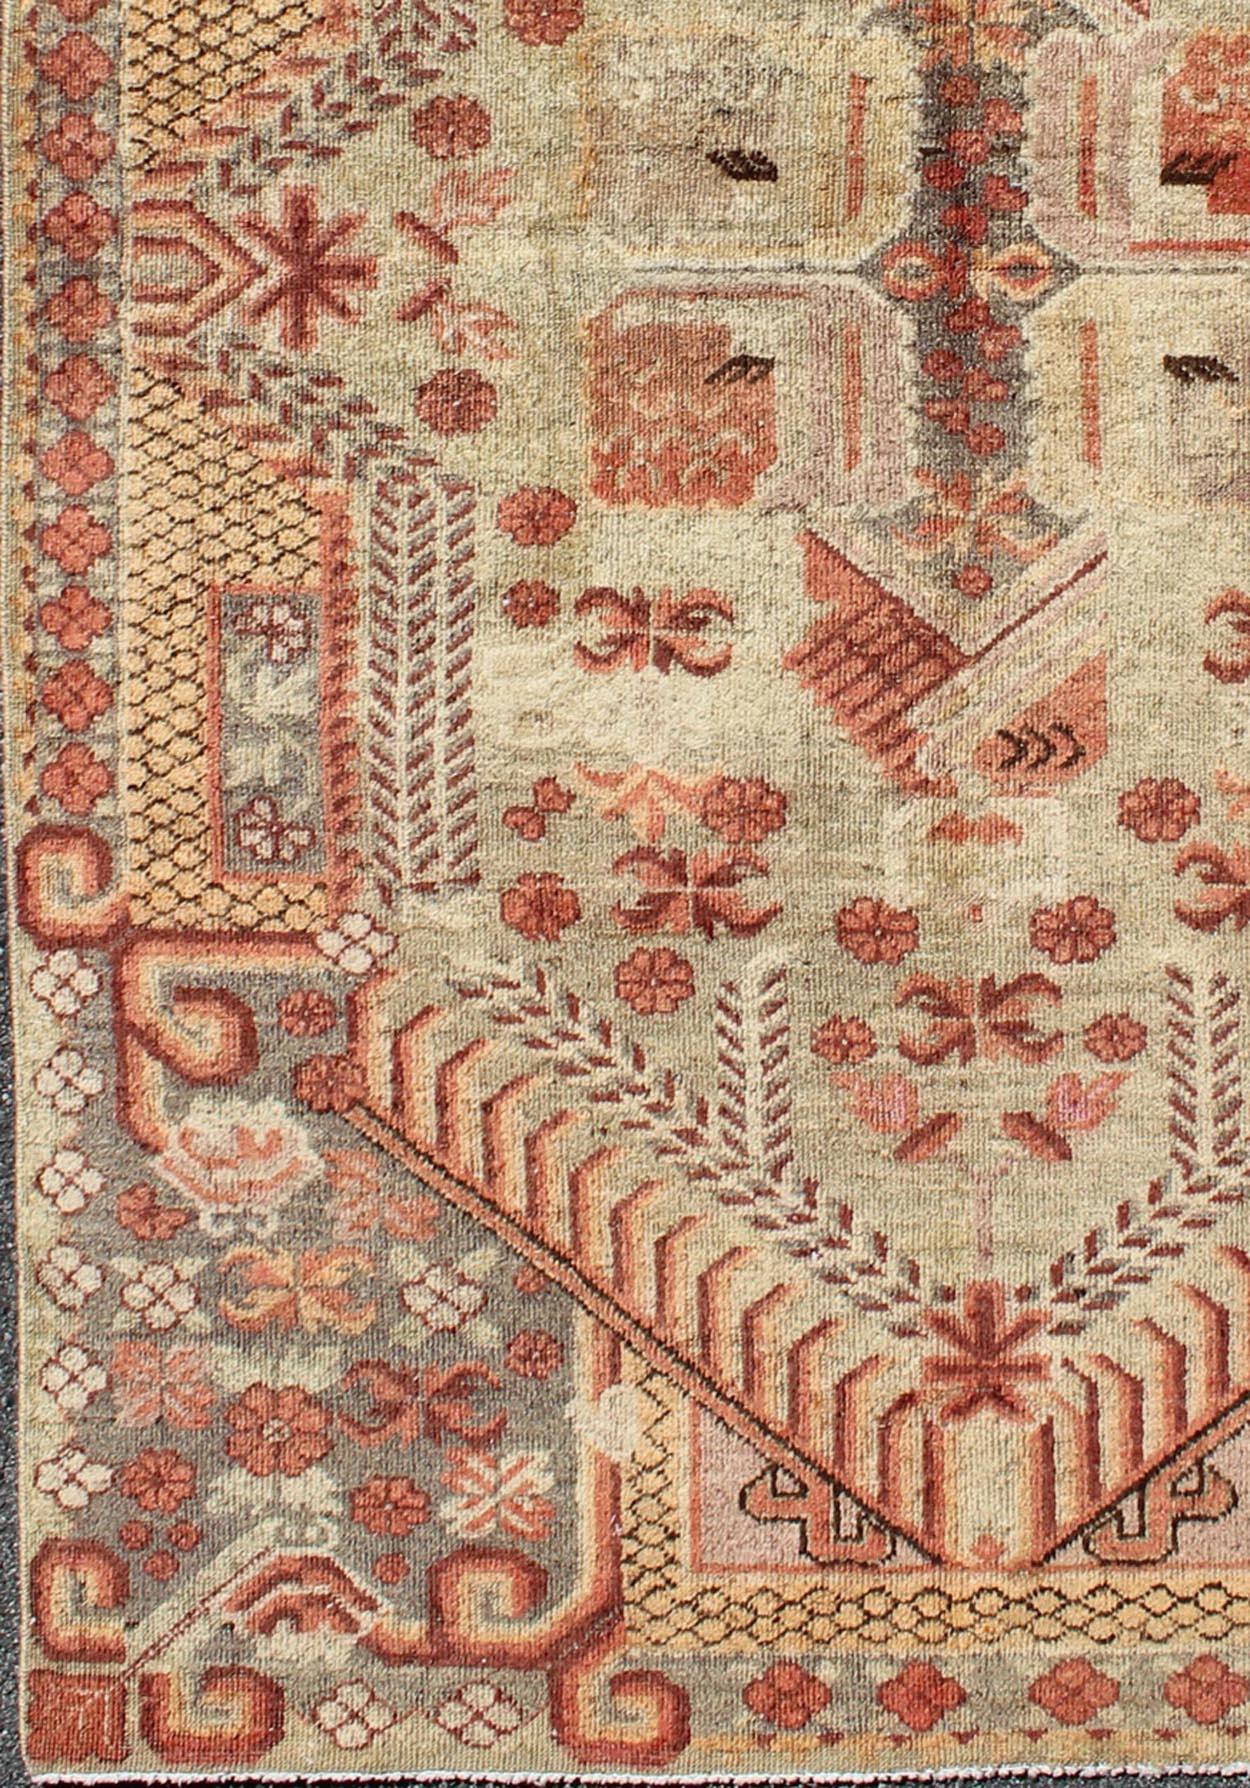 Khotan rug antique with bright coloration, rug mp-884-113550, country of origin / type: Turkestan / Khotan, circa 1930

This antique Khotan rug from Turkestan features a geometric tribal design that expands in intricate patterns throughout the